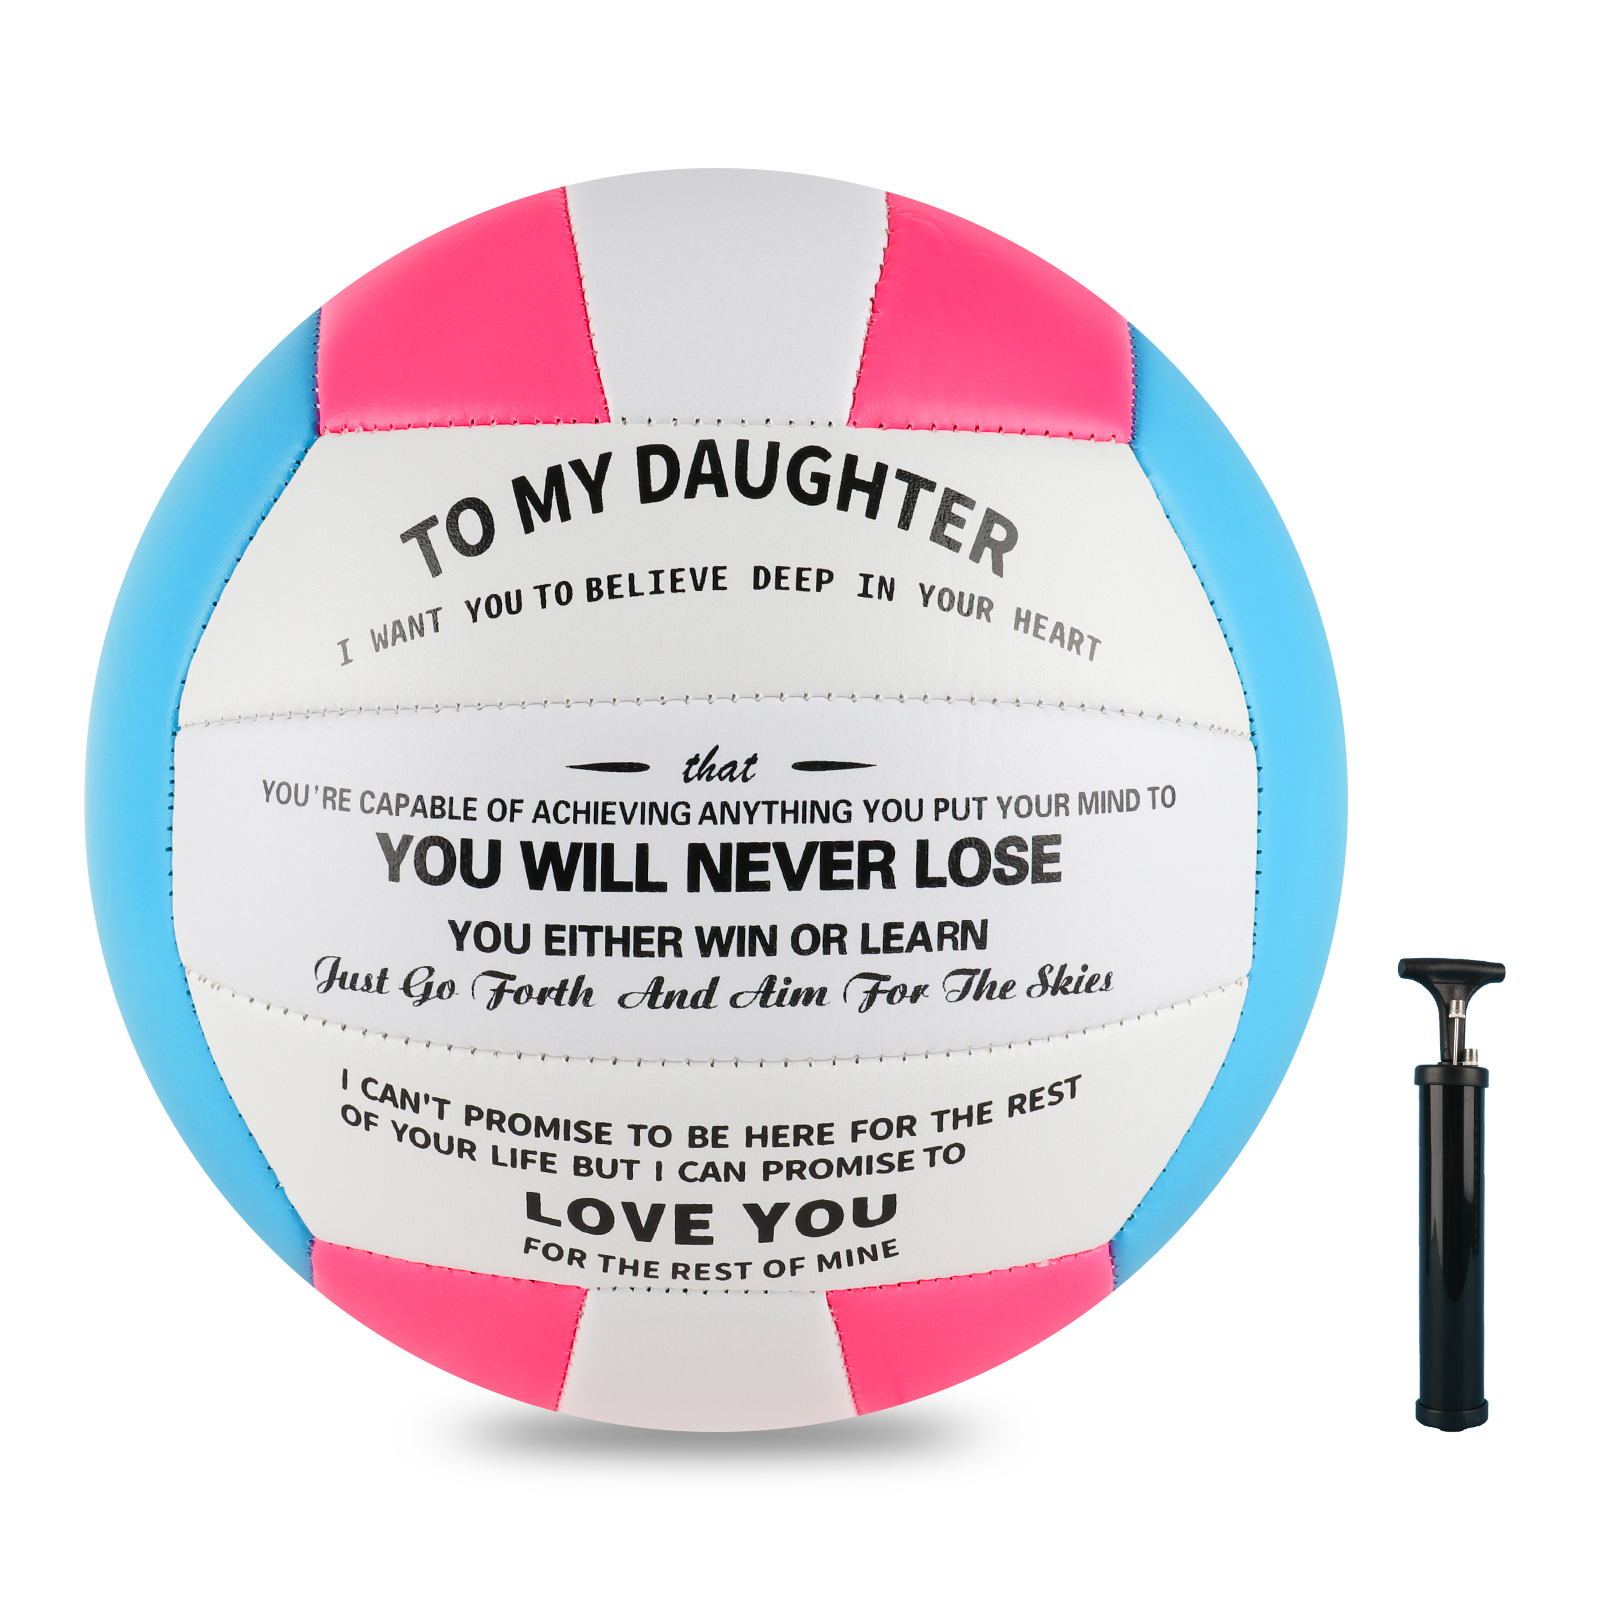 Volleyball Gift for Daughter Personalized Indoor Outdoor Sports Balls,Engraved Message Volleyballs Official Size 5 Birthday Presents from Mom Dad,with Pump